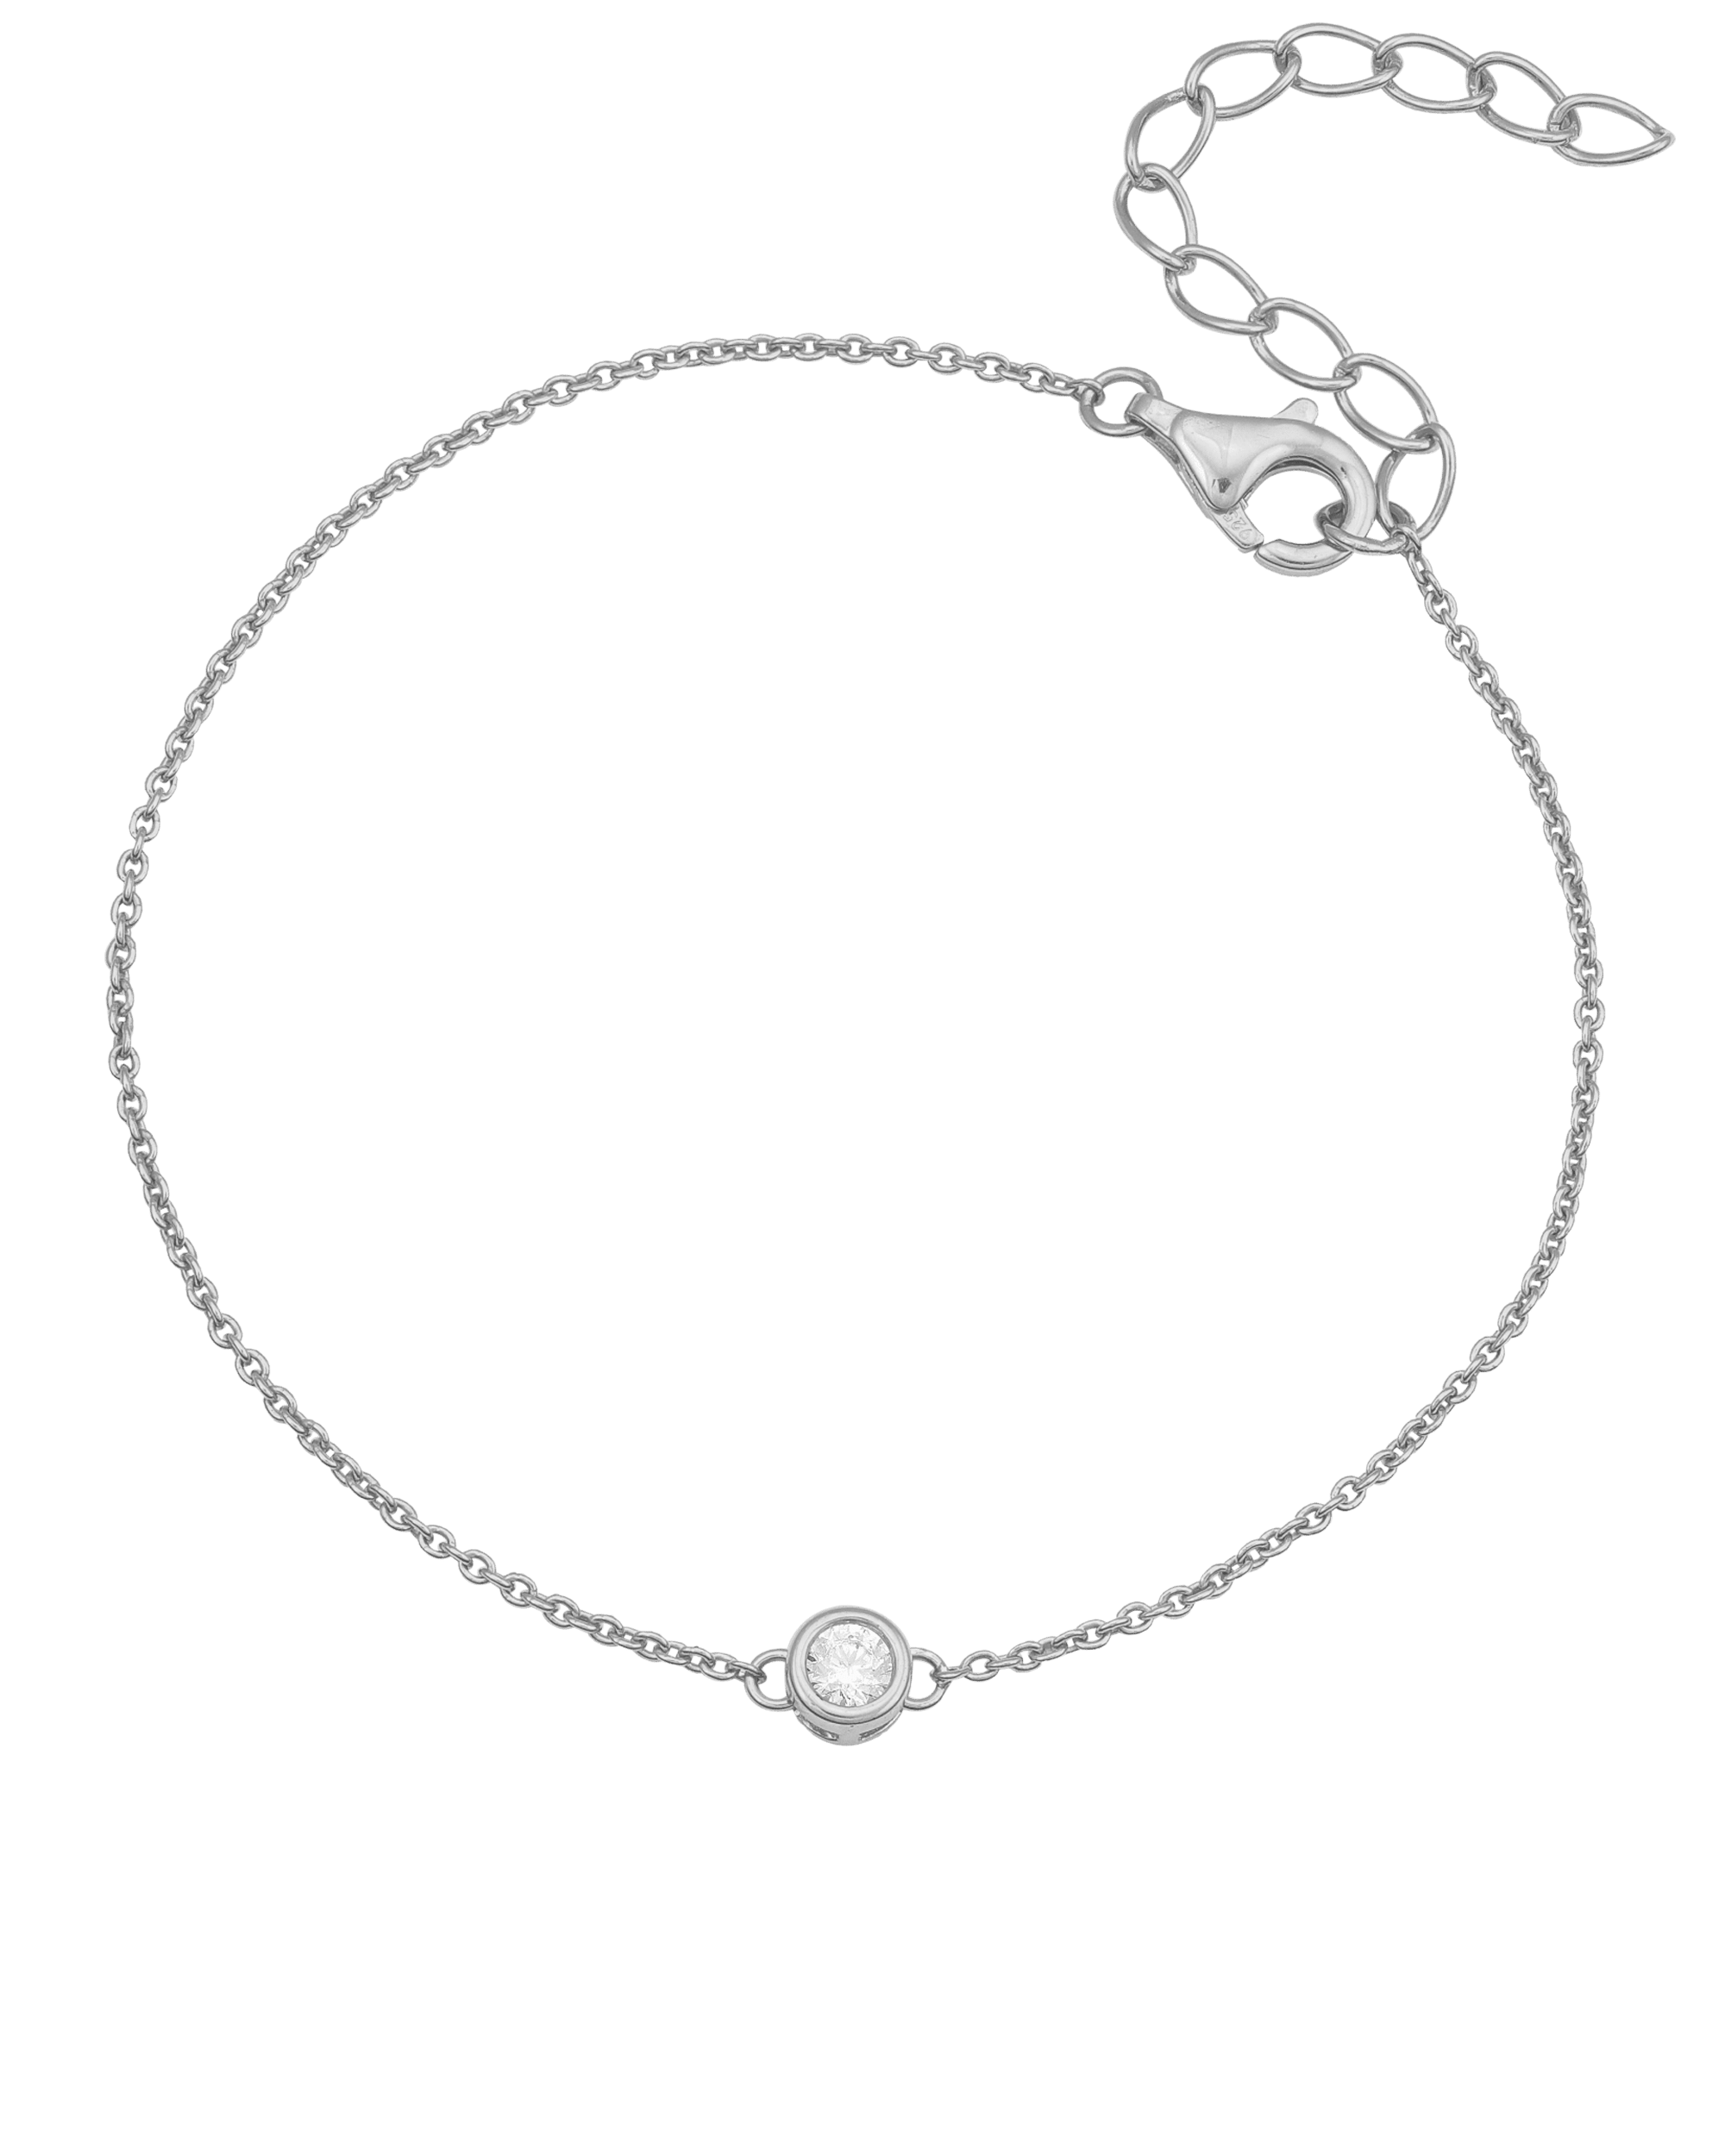 Chain of Love - 925 Sterling Silver Bracelets magal-dev Large: 0.10ct 6" with 1.5" extender 